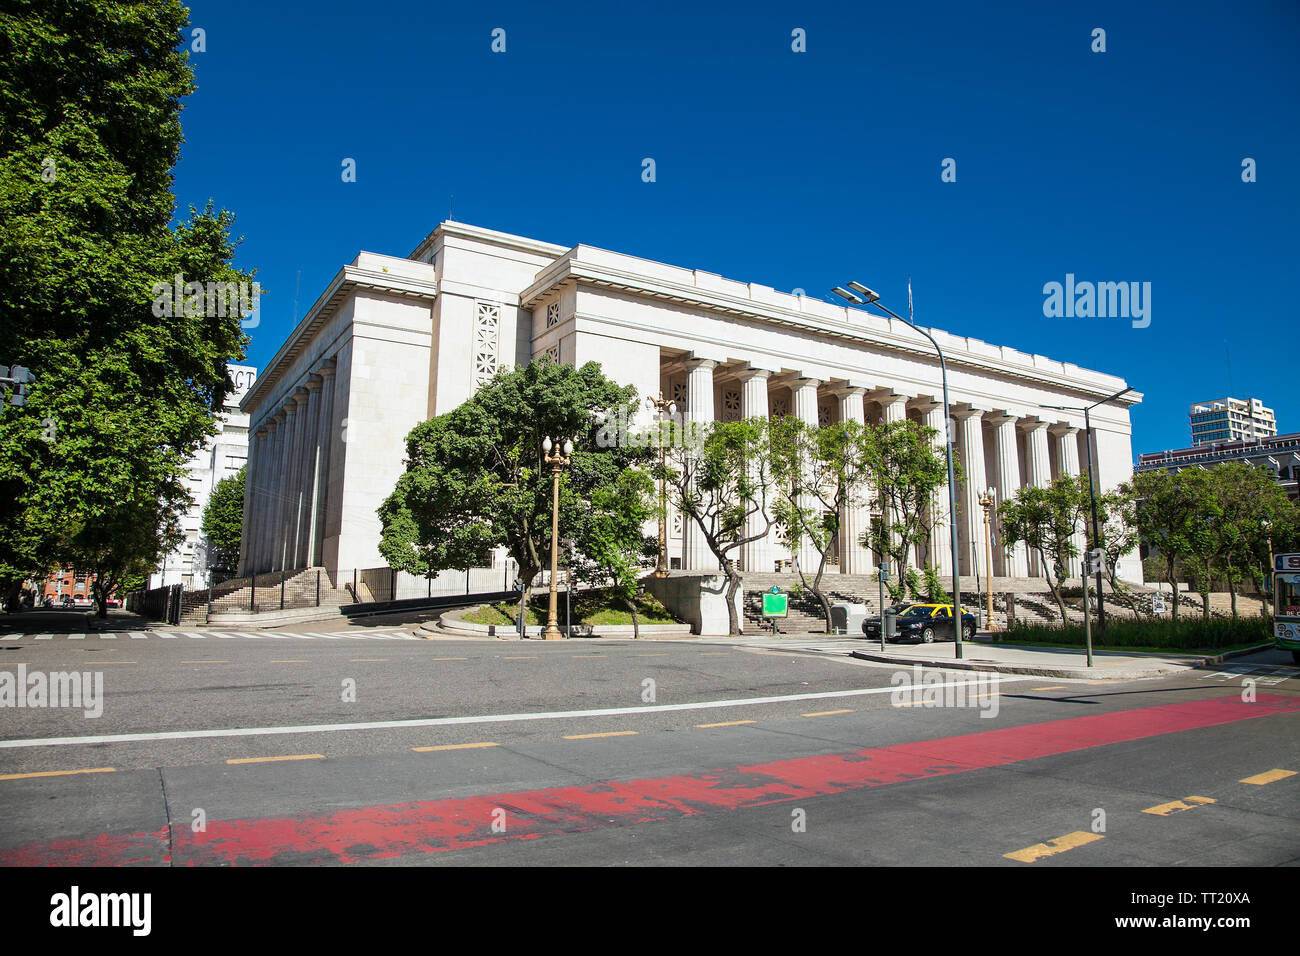 Bueno Aires, Argentina- Dec 27, 2018: Faculty of Engineering (University of Buenos Aires) in Av. Paseo Colon at San Telmo district in Buenos Aires cit Stock Photo